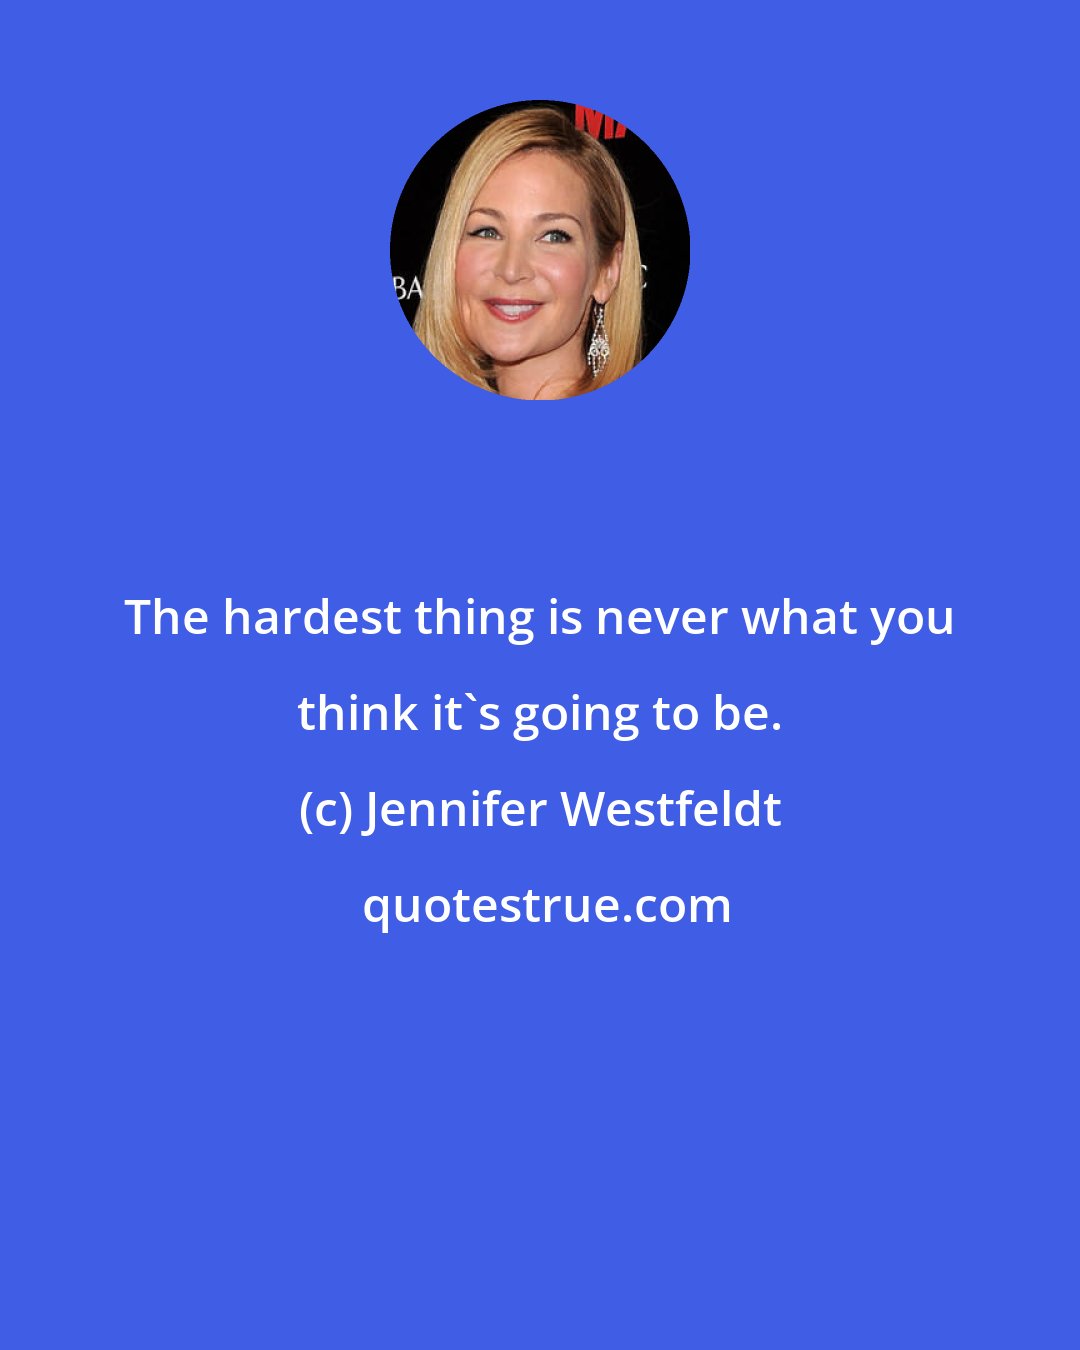 Jennifer Westfeldt: The hardest thing is never what you think it's going to be.